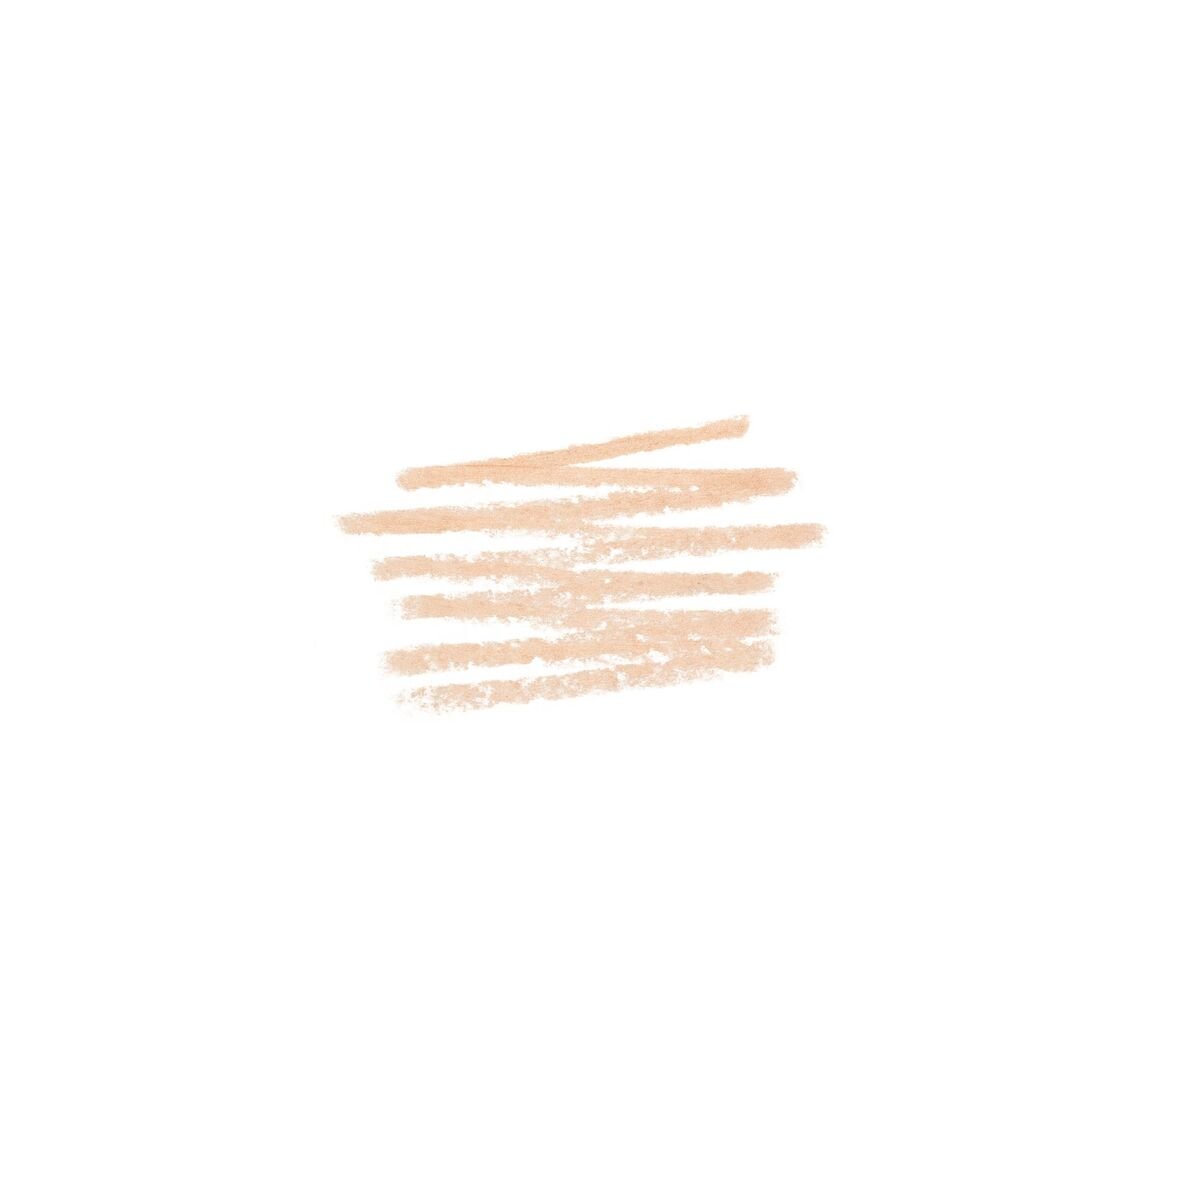 Flormar Eye Brow Up Pencil Highlighter, Champagne 00